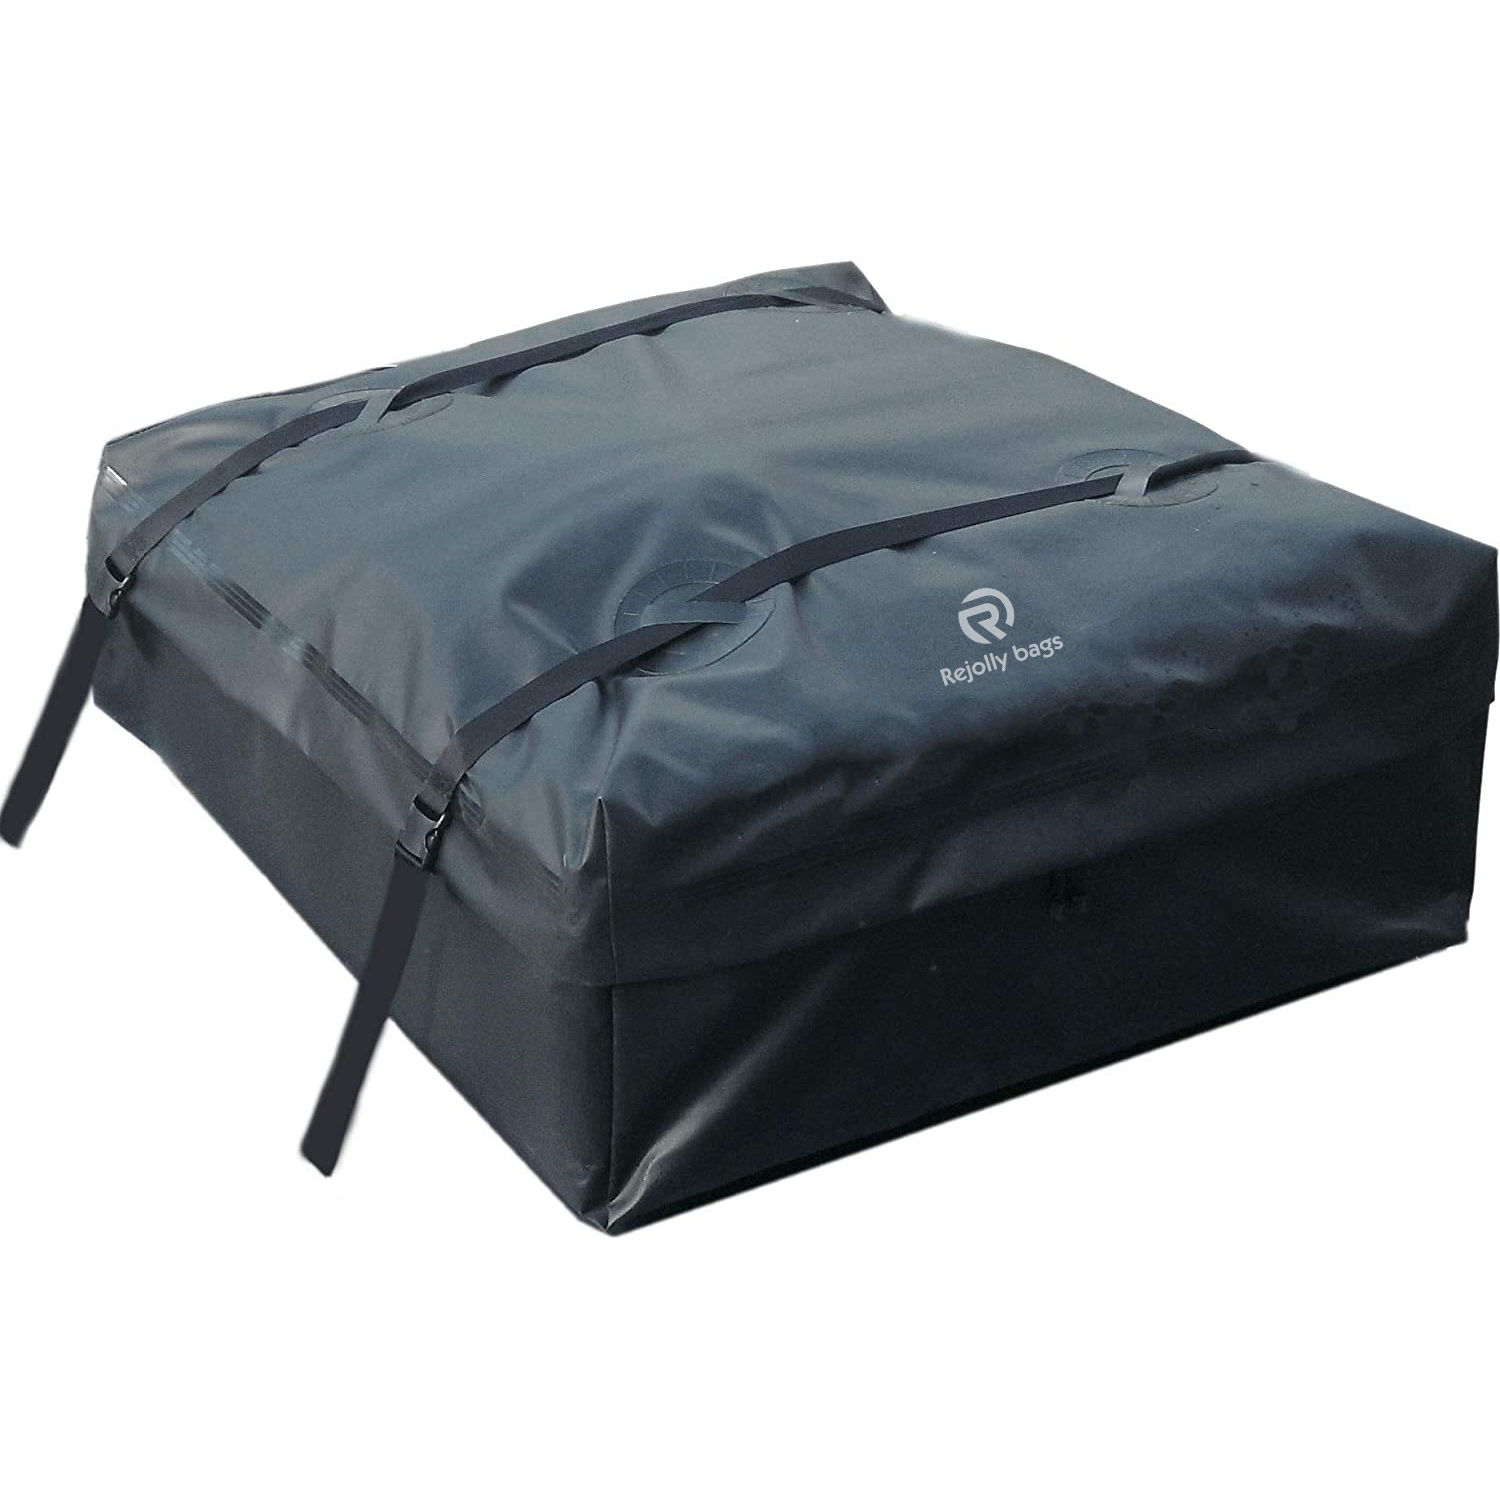 Waterproof Car Top Carrier for Top of Vehicle Includes Straps Mat Storage Rooftop Cargo Carrier